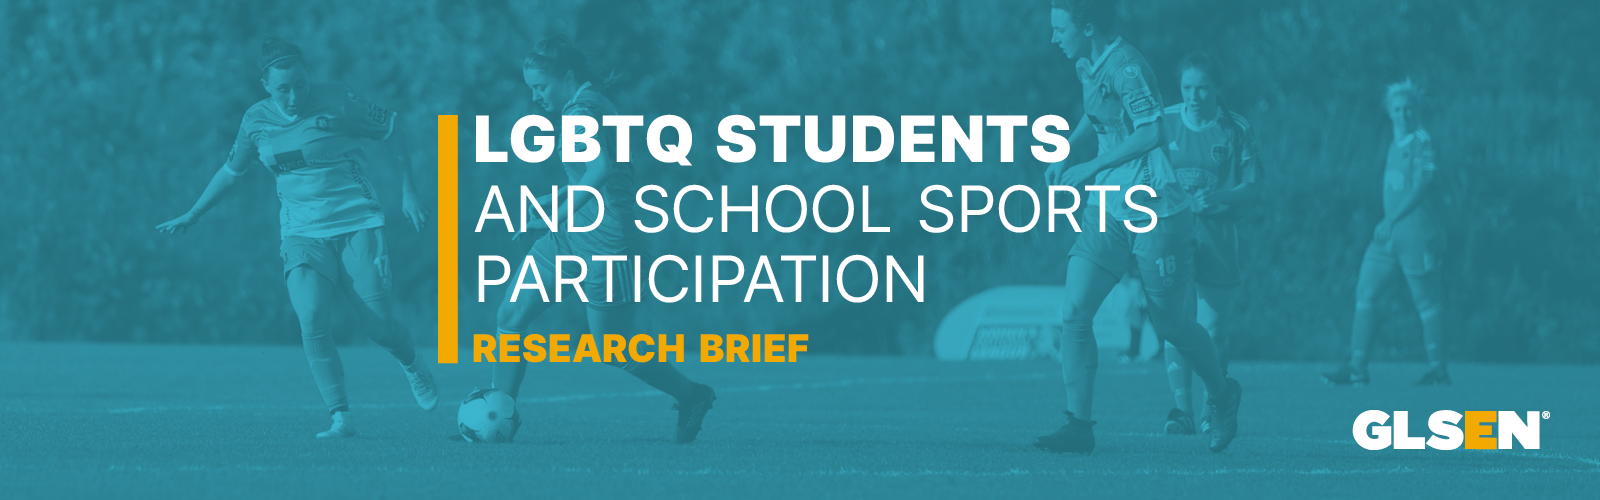 Text says LGBTQ students and school sports participation, research brief